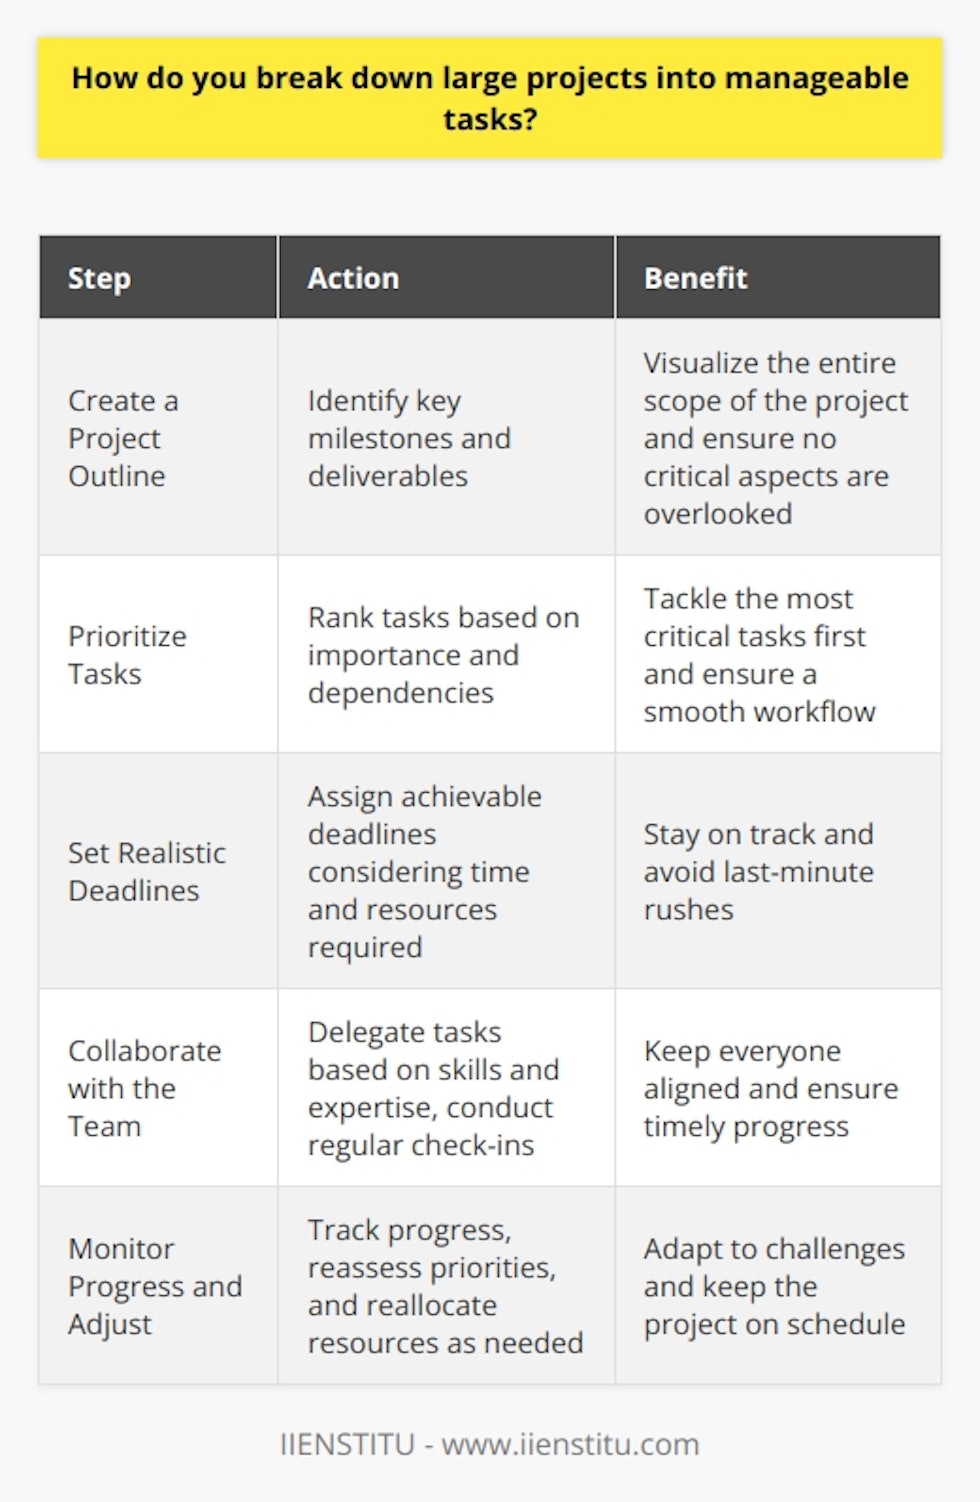 When tackling large projects, I break them down into smaller, manageable tasks. This approach helps me stay focused and motivated throughout the projects lifecycle. Create a Project Outline I start by creating a comprehensive outline of the project, identifying key milestones and deliverables. This helps me visualize the entire scope of the project and ensures that no critical aspects are overlooked. Prioritize Tasks Next, I prioritize the tasks based on their importance and dependencies. This allows me to tackle the most critical tasks first and ensures a smooth workflow. Set Realistic Deadlines I assign realistic deadlines to each task, considering the time and resources required. This helps me stay on track and avoid last-minute rushes. Collaborate with the Team I collaborate with my team members, delegating tasks based on their skills and expertise. Regular check-ins and updates keep everyone aligned and ensure timely progress. Monitor Progress and Adjust Throughout the project, I monitor progress and make adjustments as needed. If a task takes longer than expected, I reassess priorities and reallocate resources to keep the project on schedule. By breaking down large projects into smaller, manageable tasks, I can tackle complex initiatives with confidence and deliver high-quality results on time.